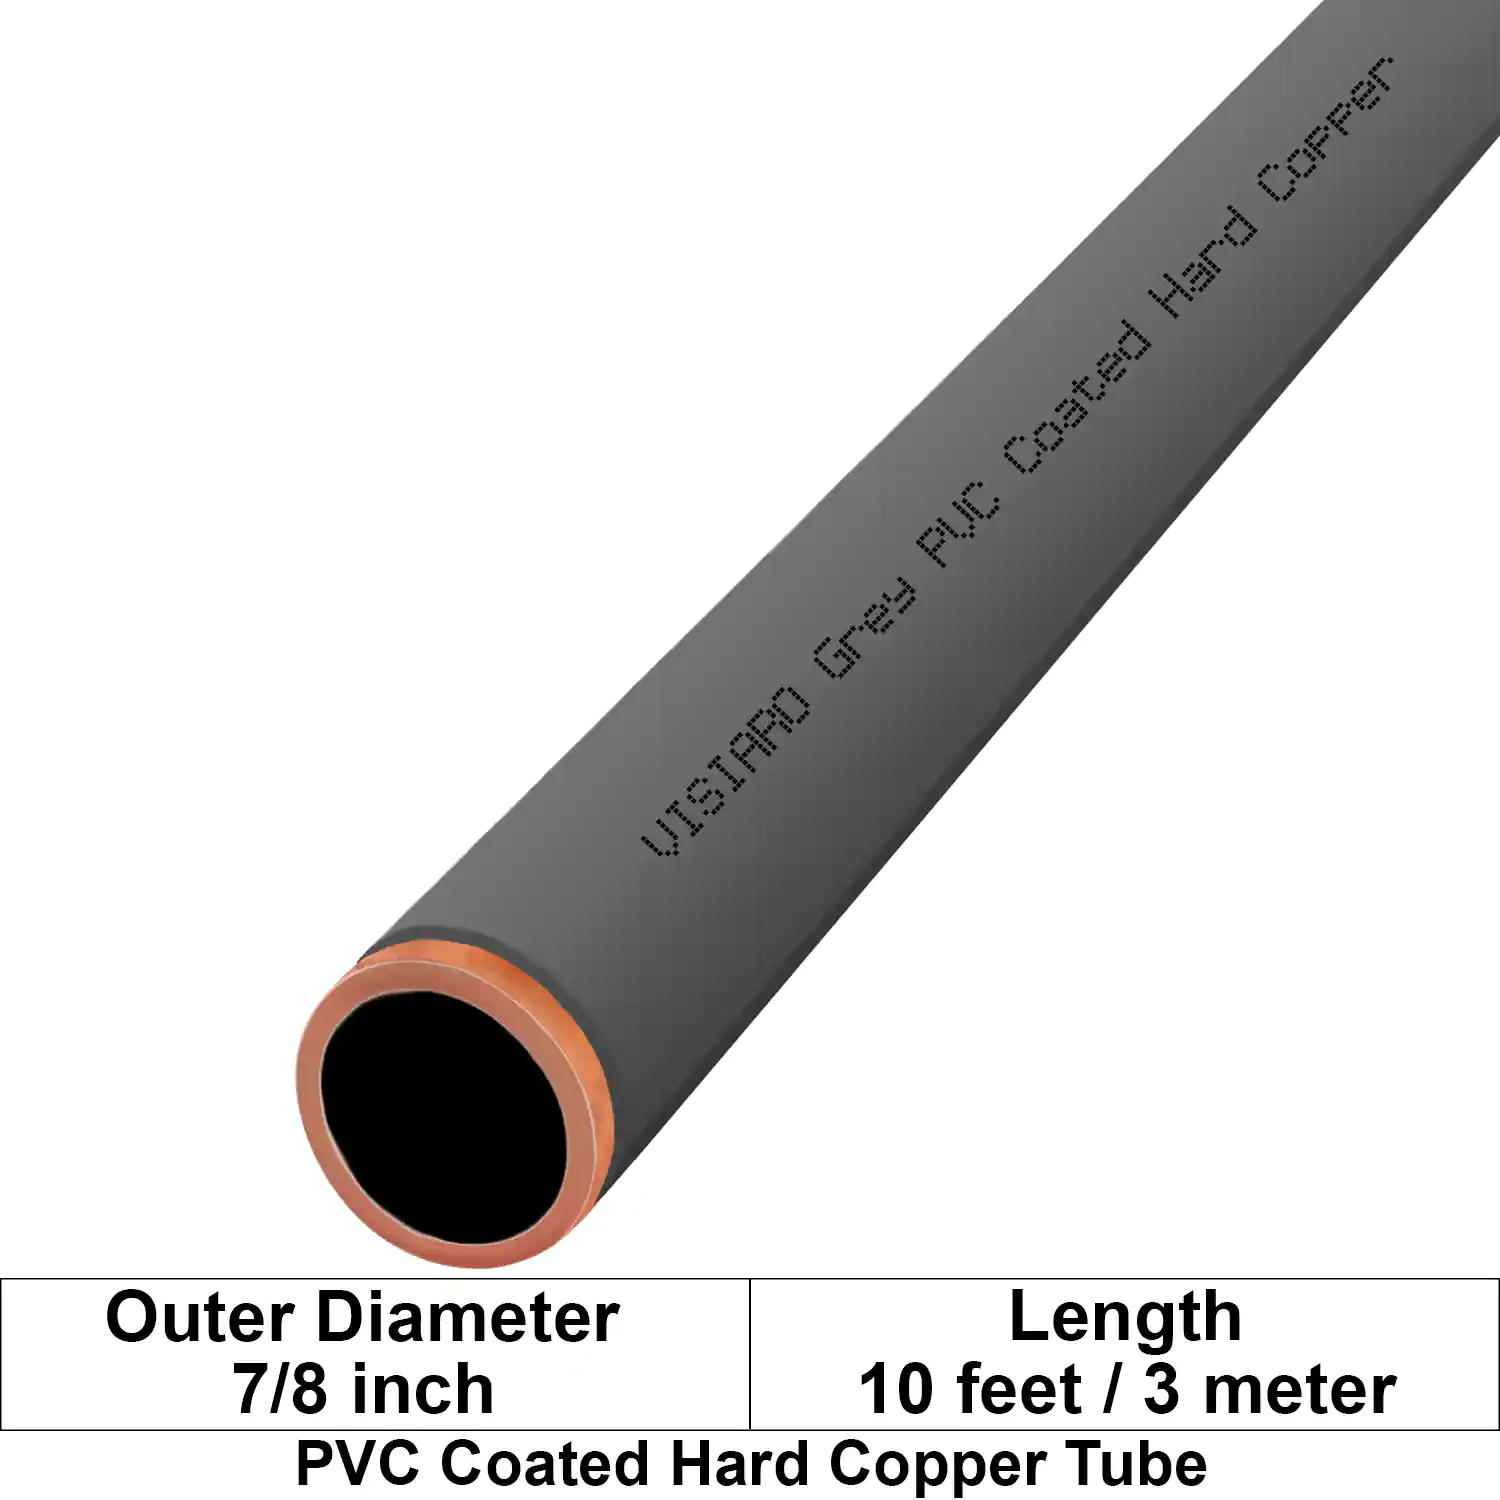 Visiaro Grey PVC Coated Hard Copper Tube 10ft long Outer Diameter - 7/8 inch